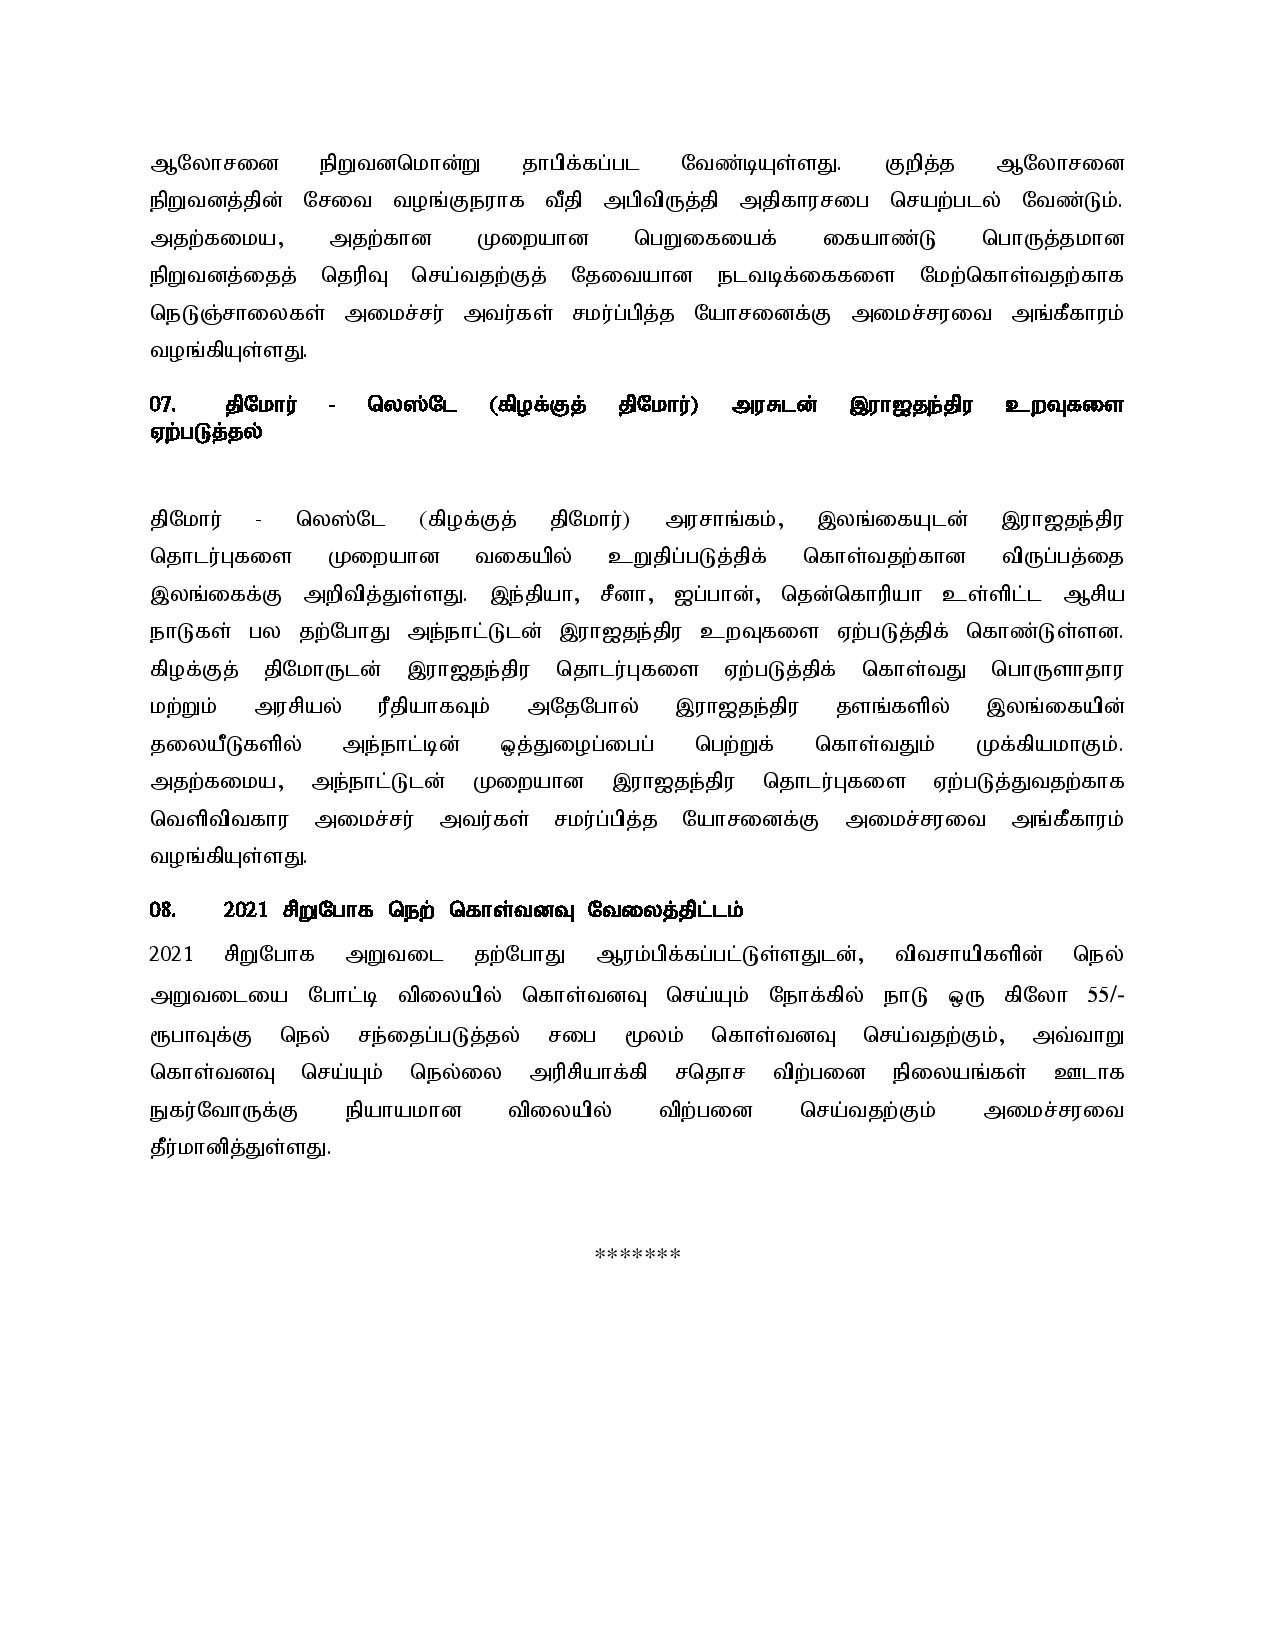 Cabinet Decision on 2021.09.13 Tamil page 004